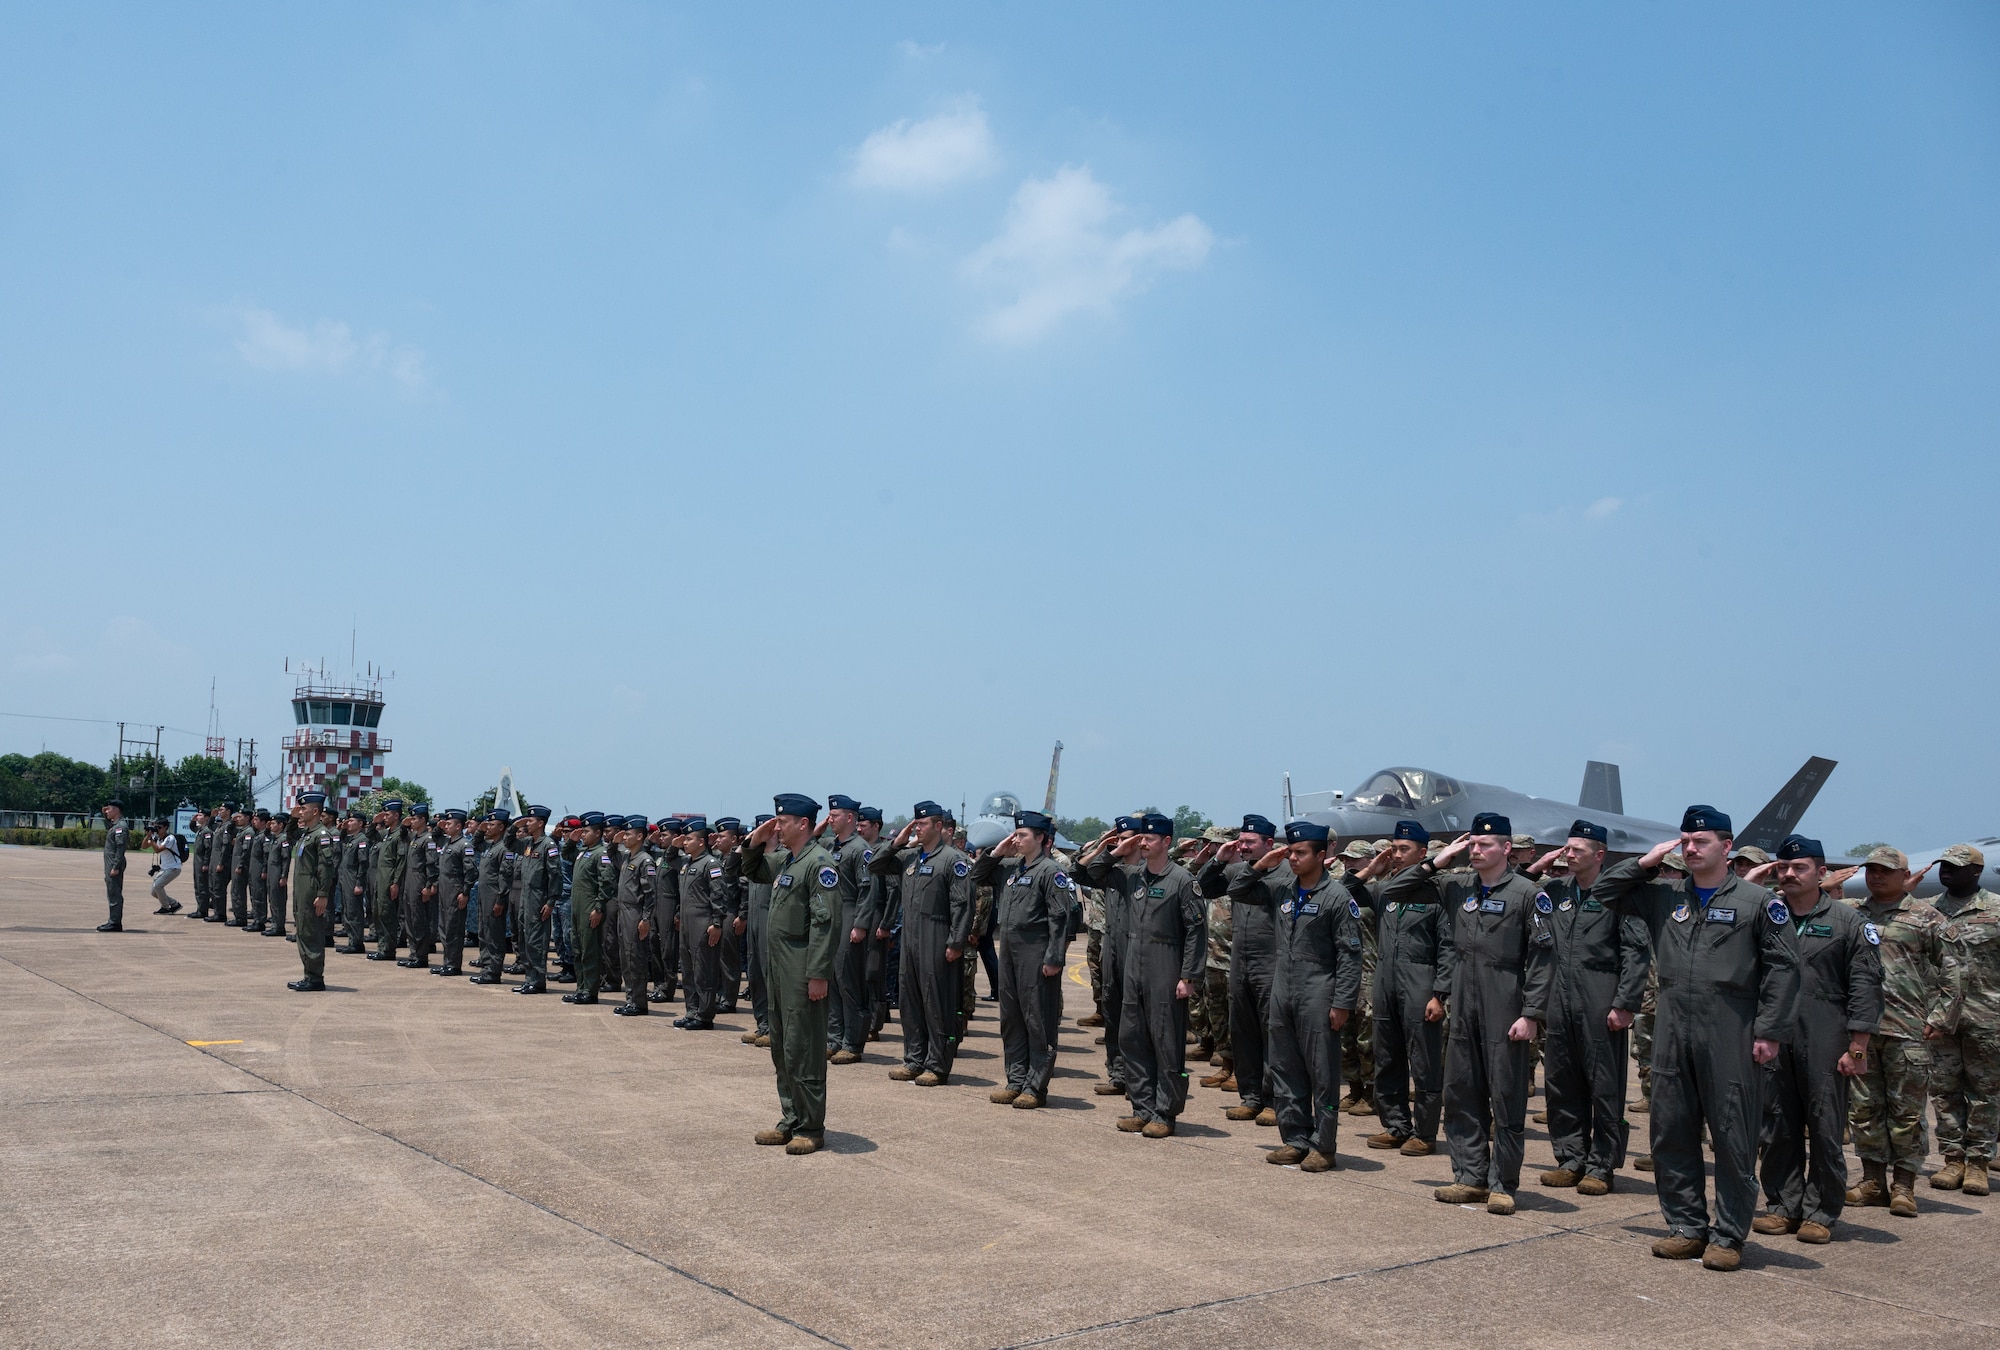 Airmen from the Royal Thai Air Force, Republic of Singapore Air Force and U.S. Air Force stand in formation during the closing ceremony for Cope Tiger 2024 at Korat Royal Thai Air Force Base, Thailand, March 29, 2024. Exercises like these enhance capability and interoperability, while strengthening trust between like-minded nations to ensure the air, maritime, cyber, and space domains remain open to all nations. (U.S. Air Force photo by Tech. Sgt. Hailey Haux)